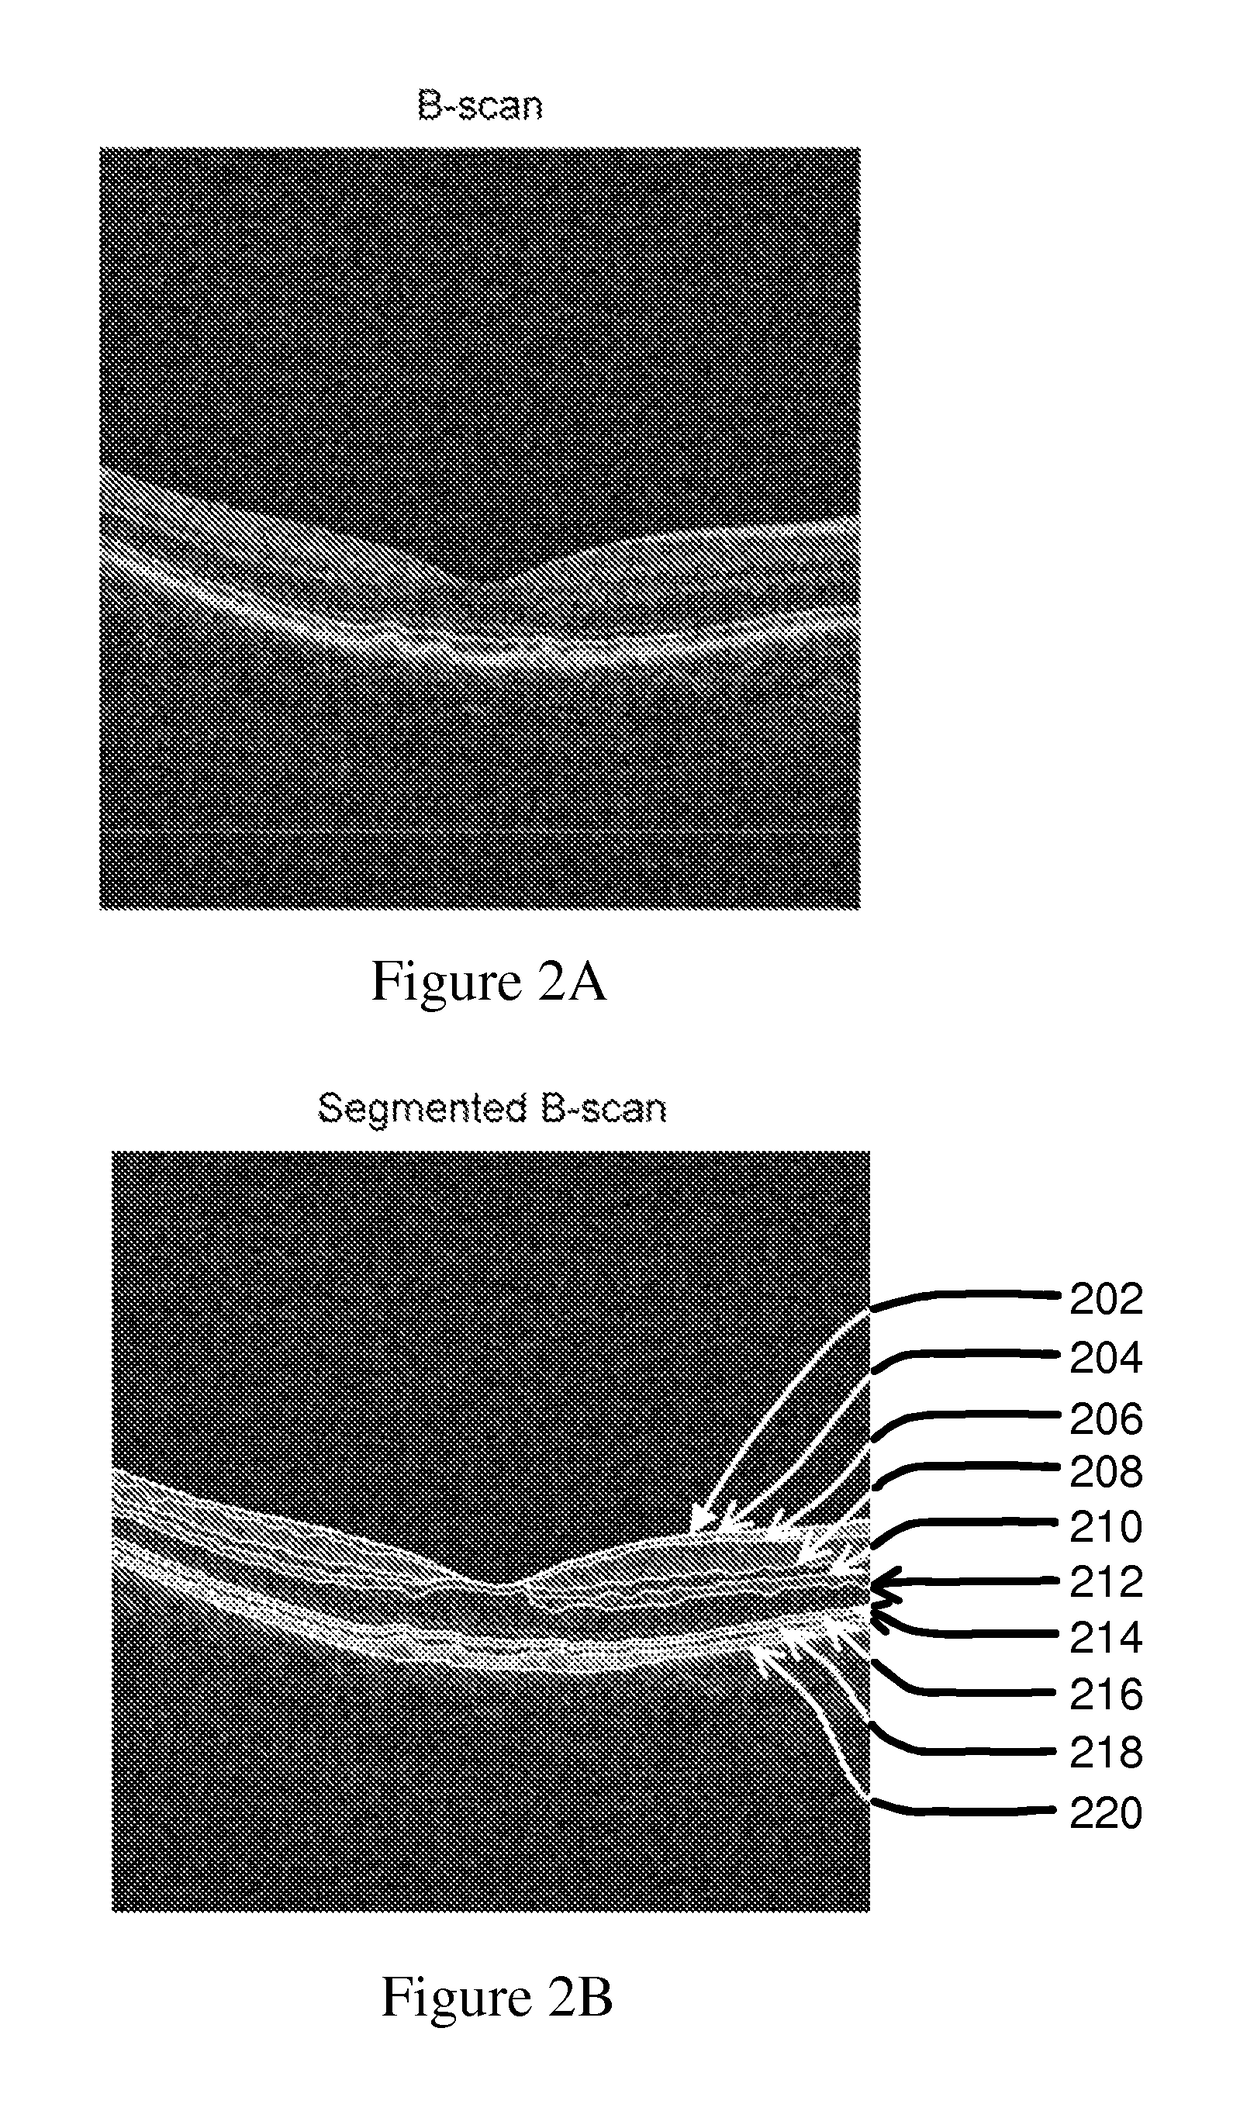 Method and system for evaluating progression of age-related macular degeneration